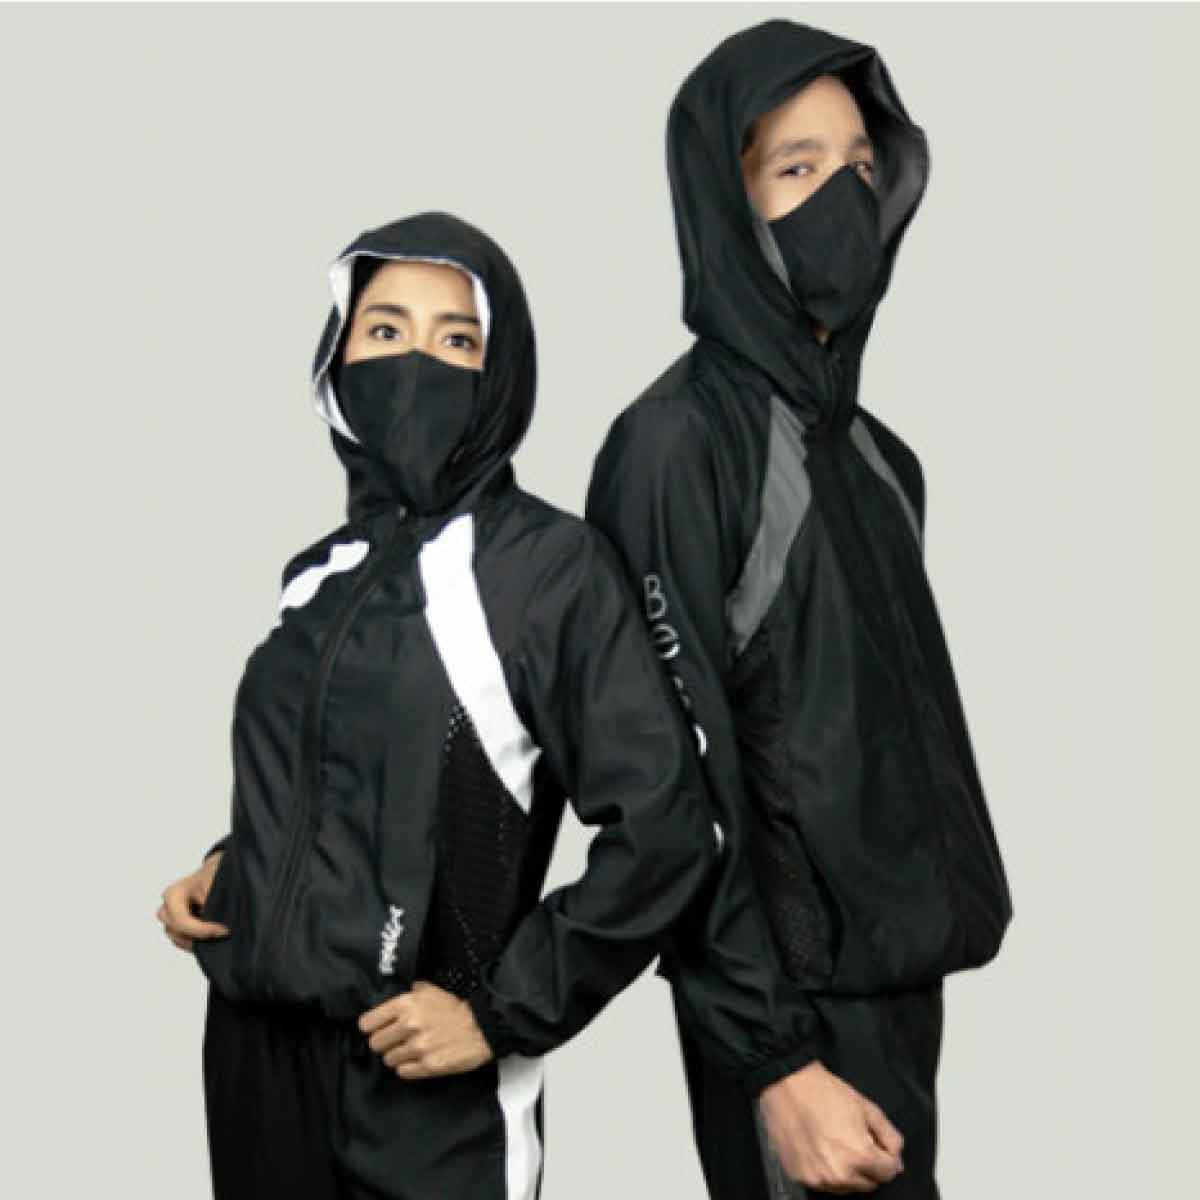 PROTECTIVE BLACK AND GRAY MEN'S JACKET- FACE MASK INCLUDED